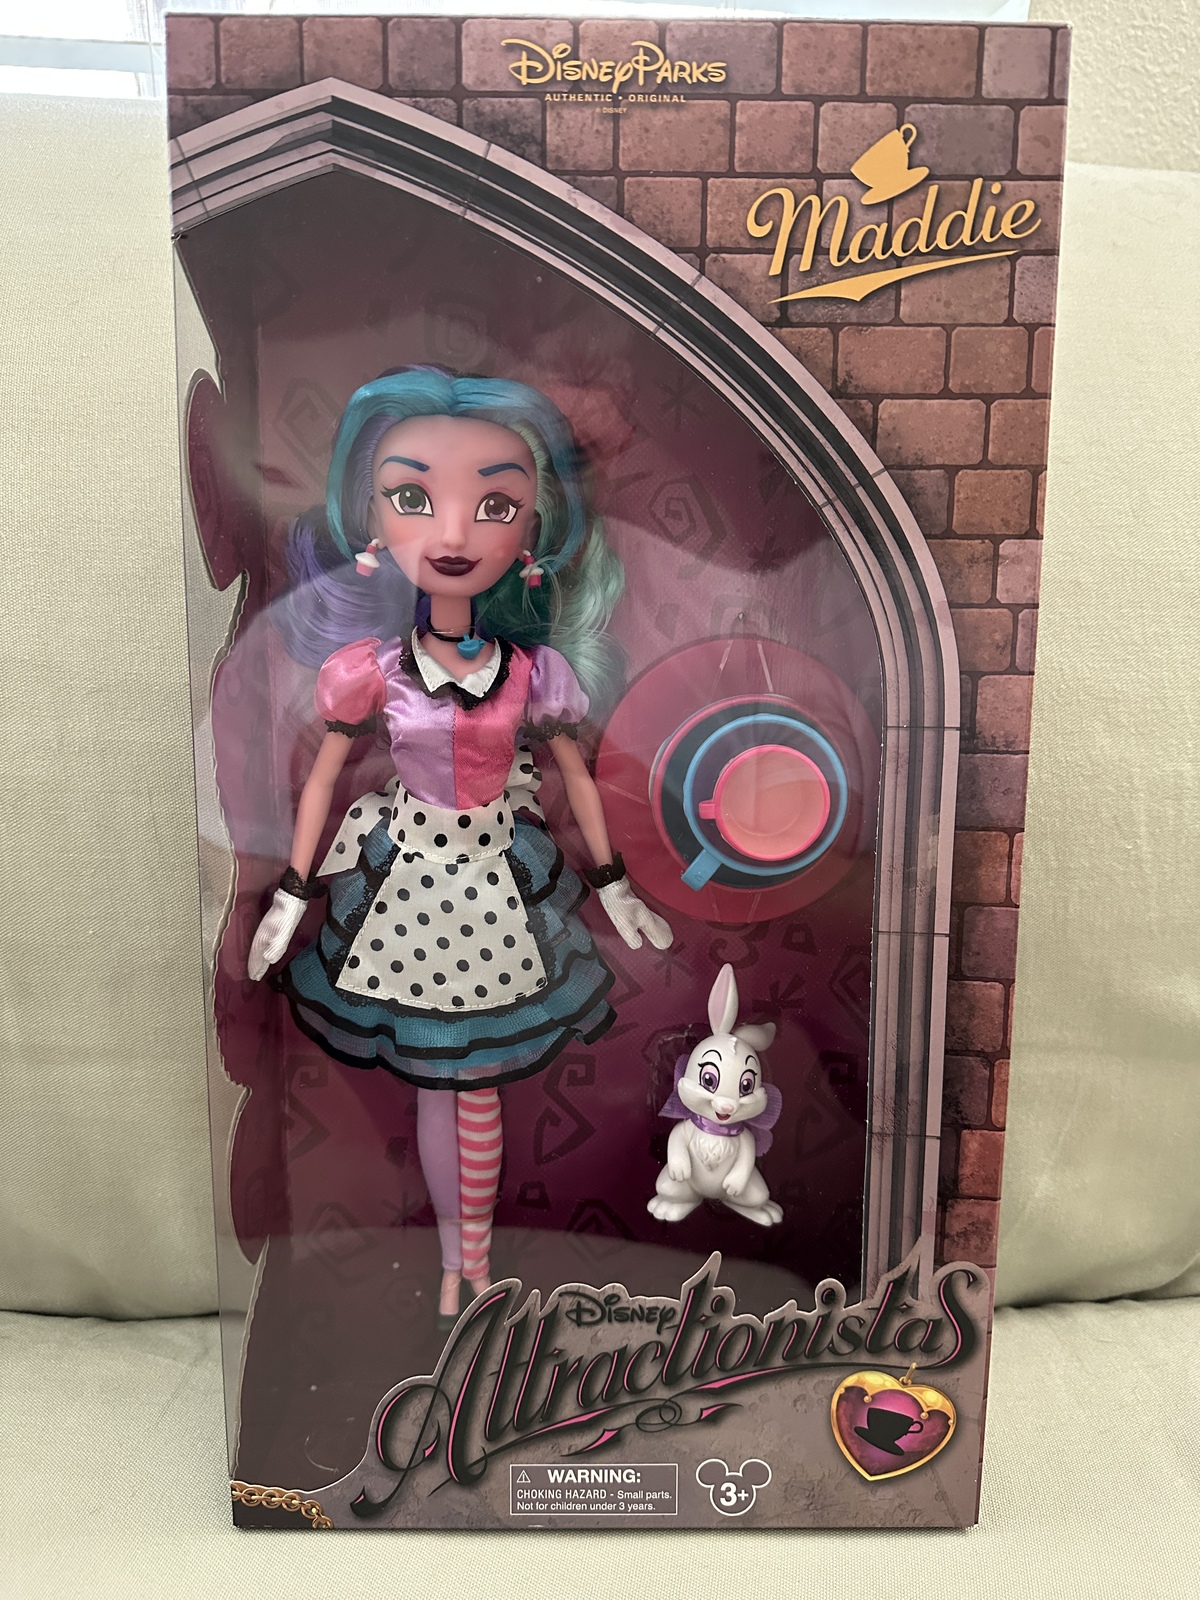 Primary image for Disney Parks Attractionistas Maddie Mad Tea Party Doll NEW IN BOX RARE RETIRED